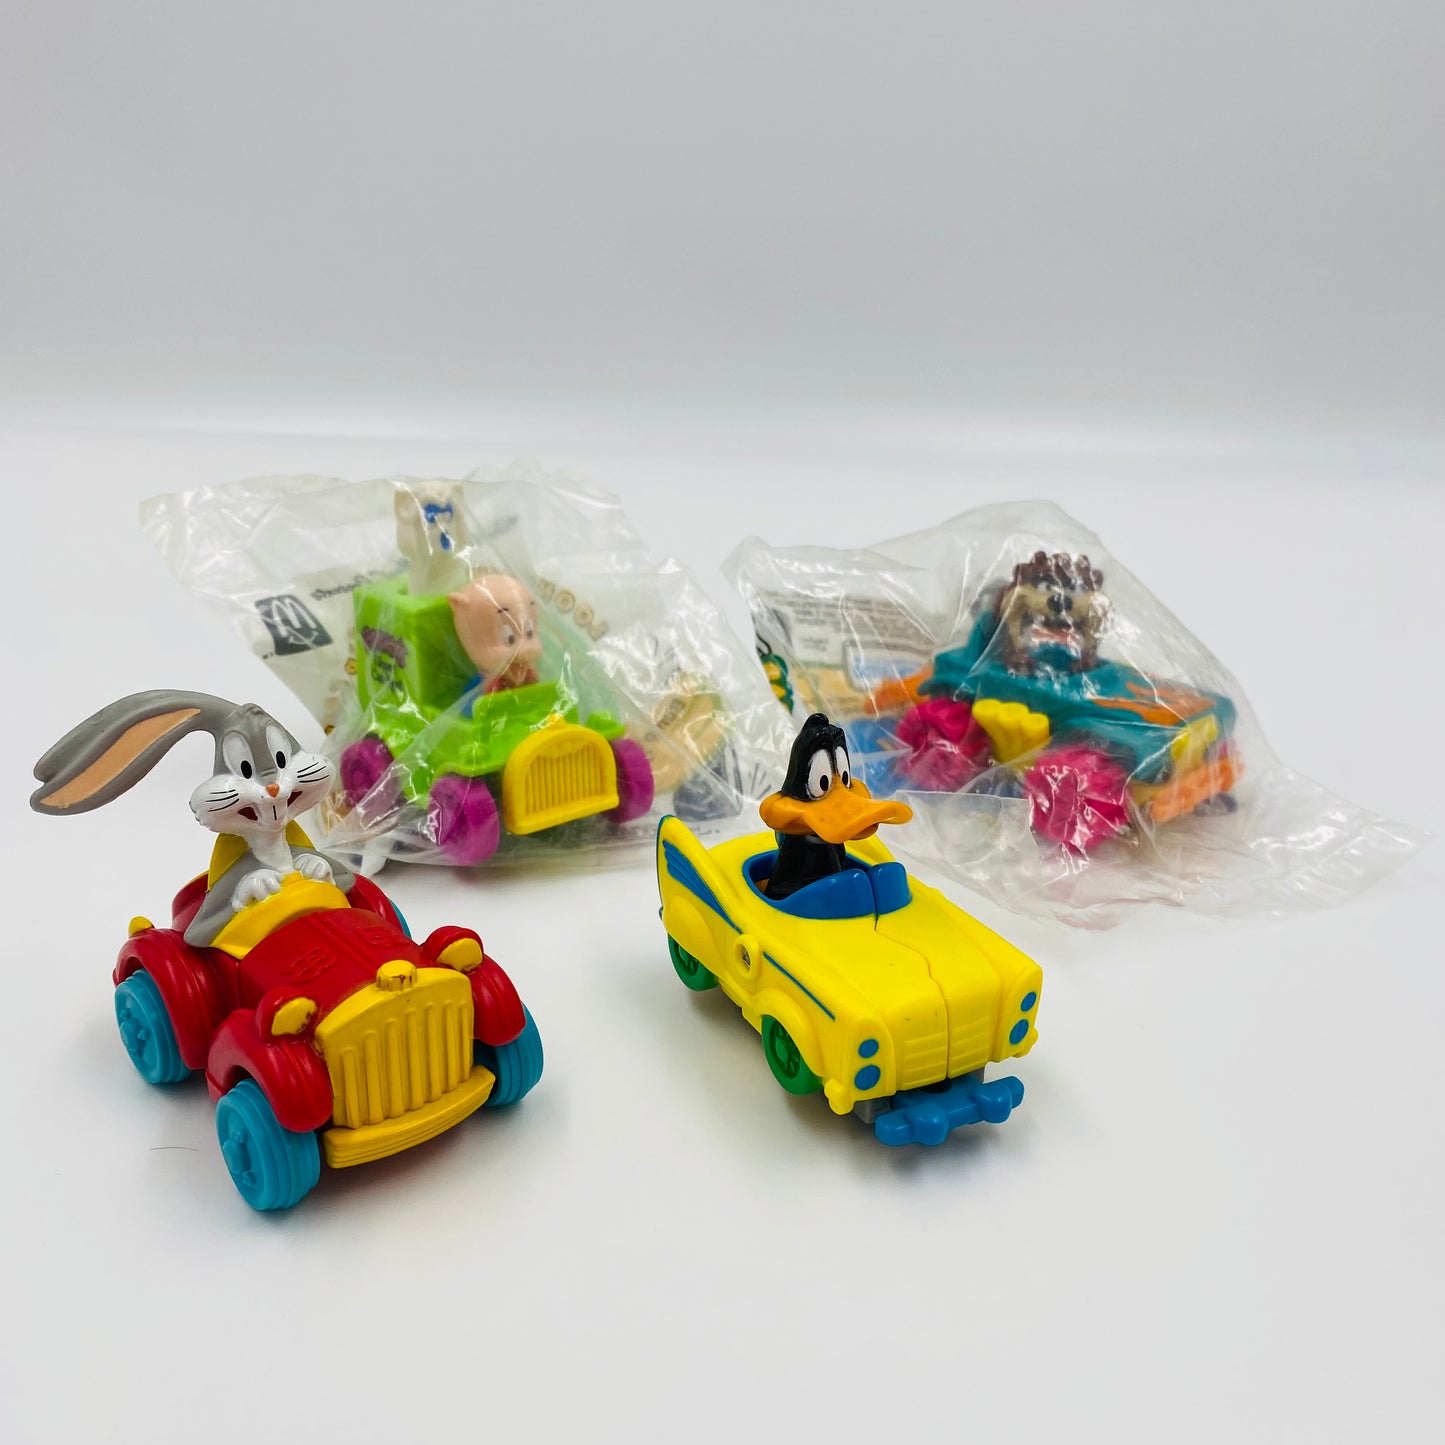 Looney Tunes Quack-Up Cars complete set of 5 McDonald's Happy Meal toys (1992) bagged & loose